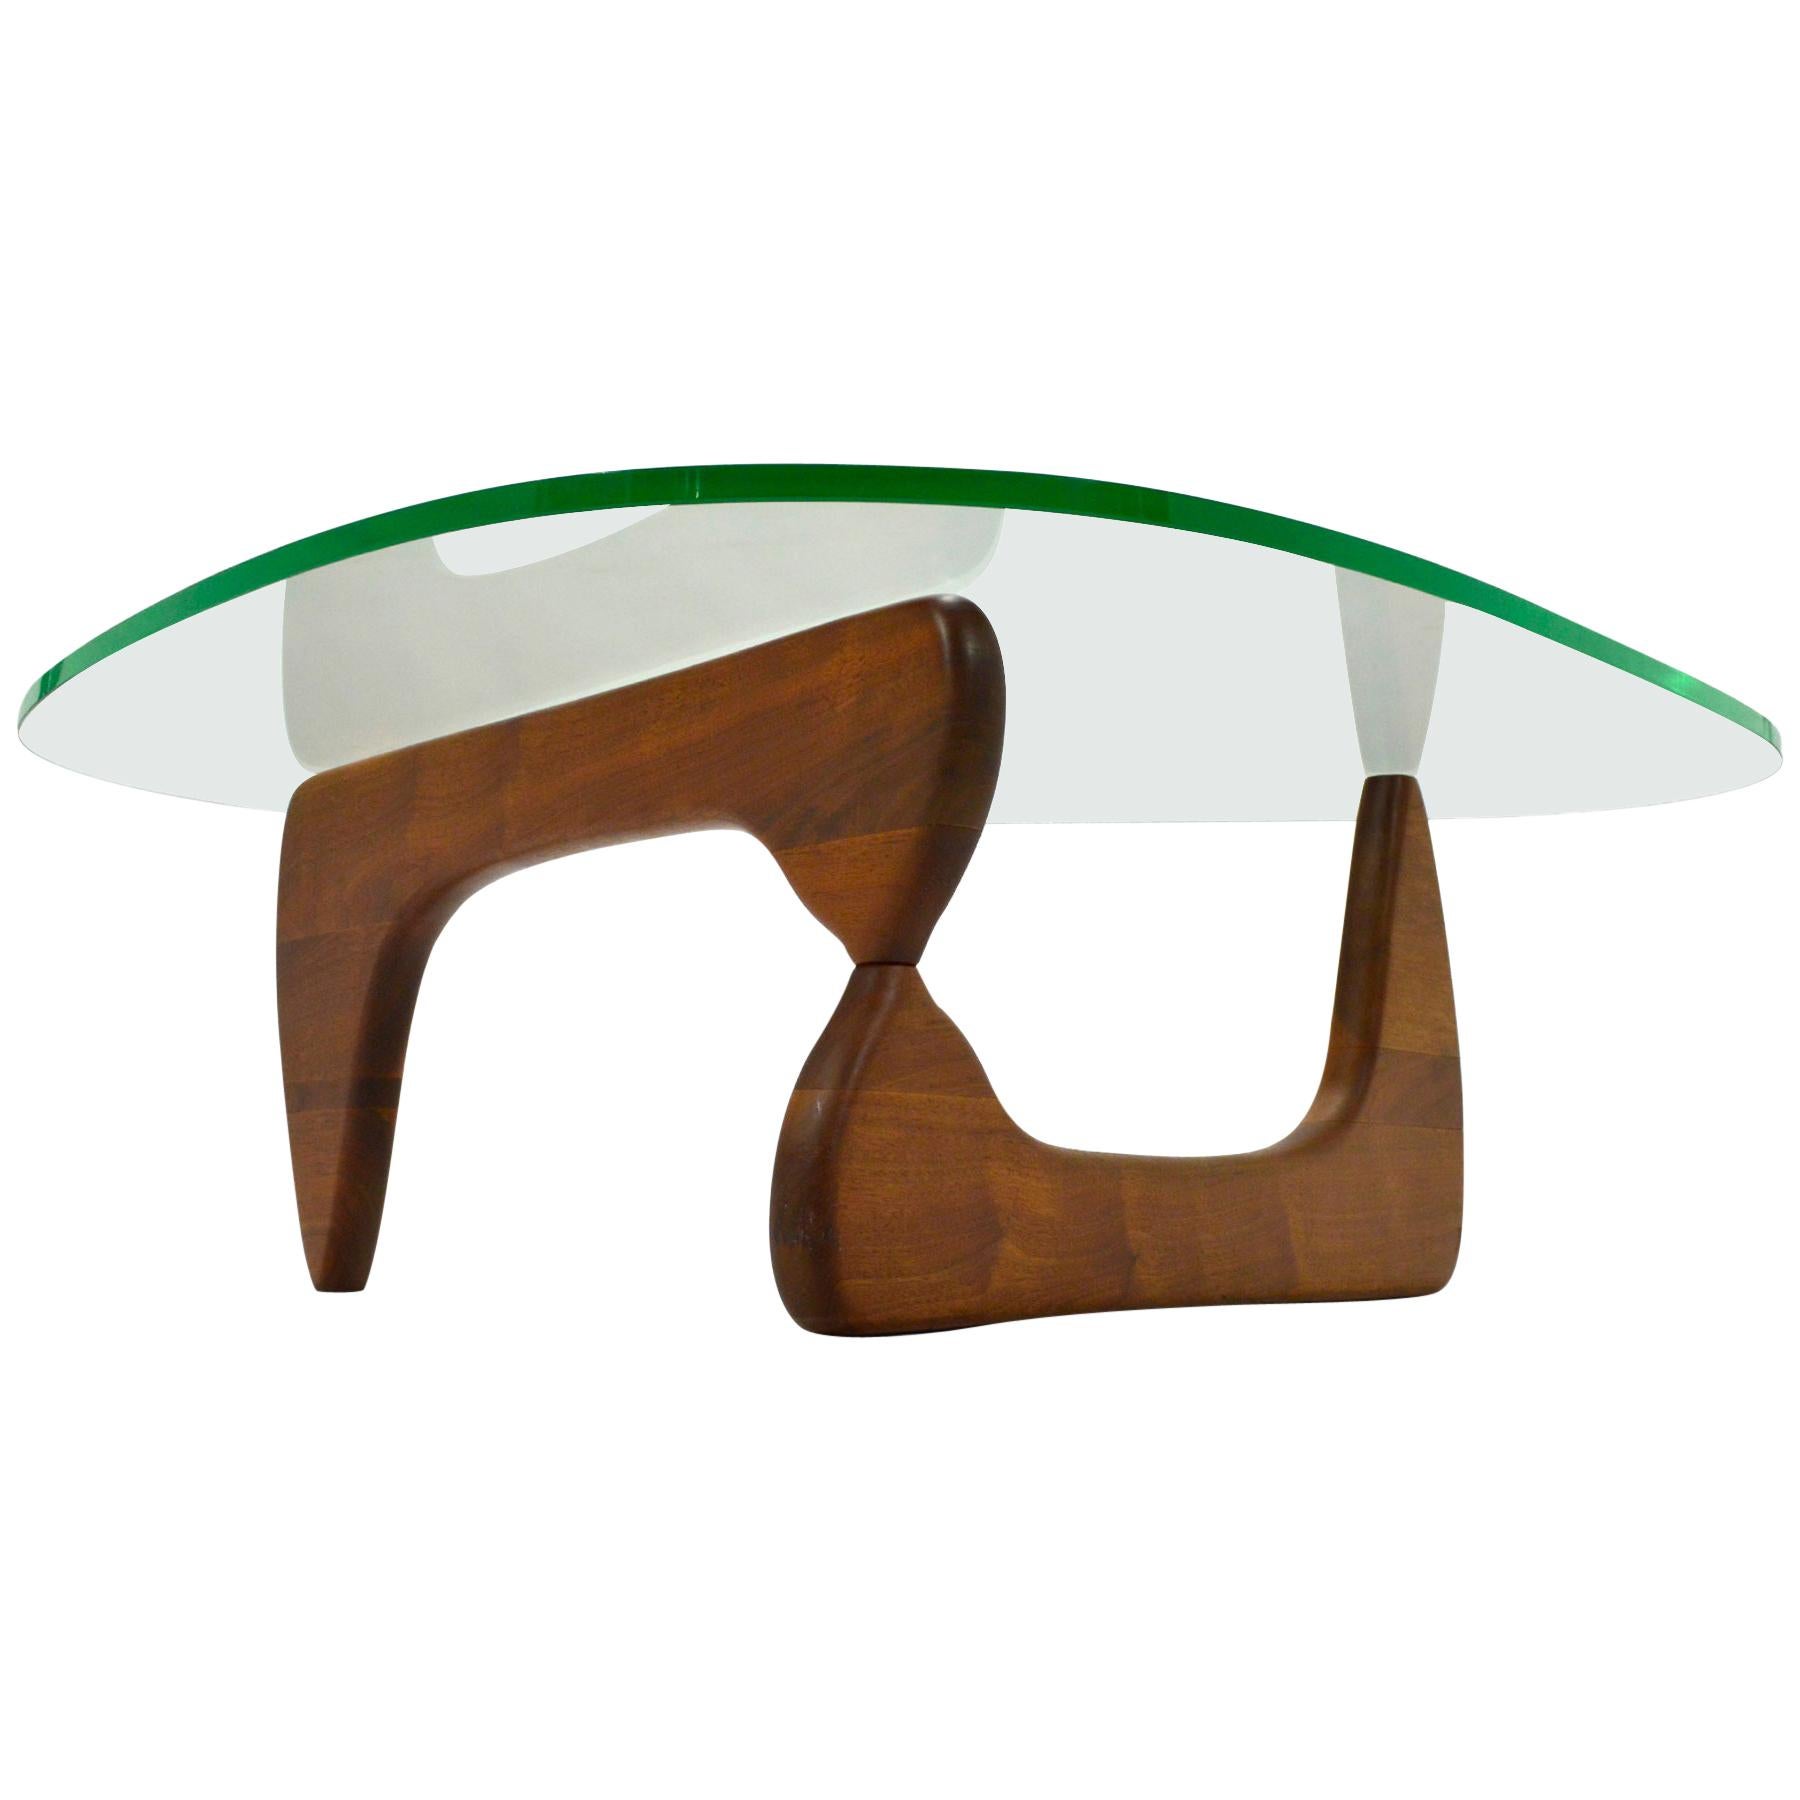 Early Noguchi IN-50 Coffee Table by Herman Miller